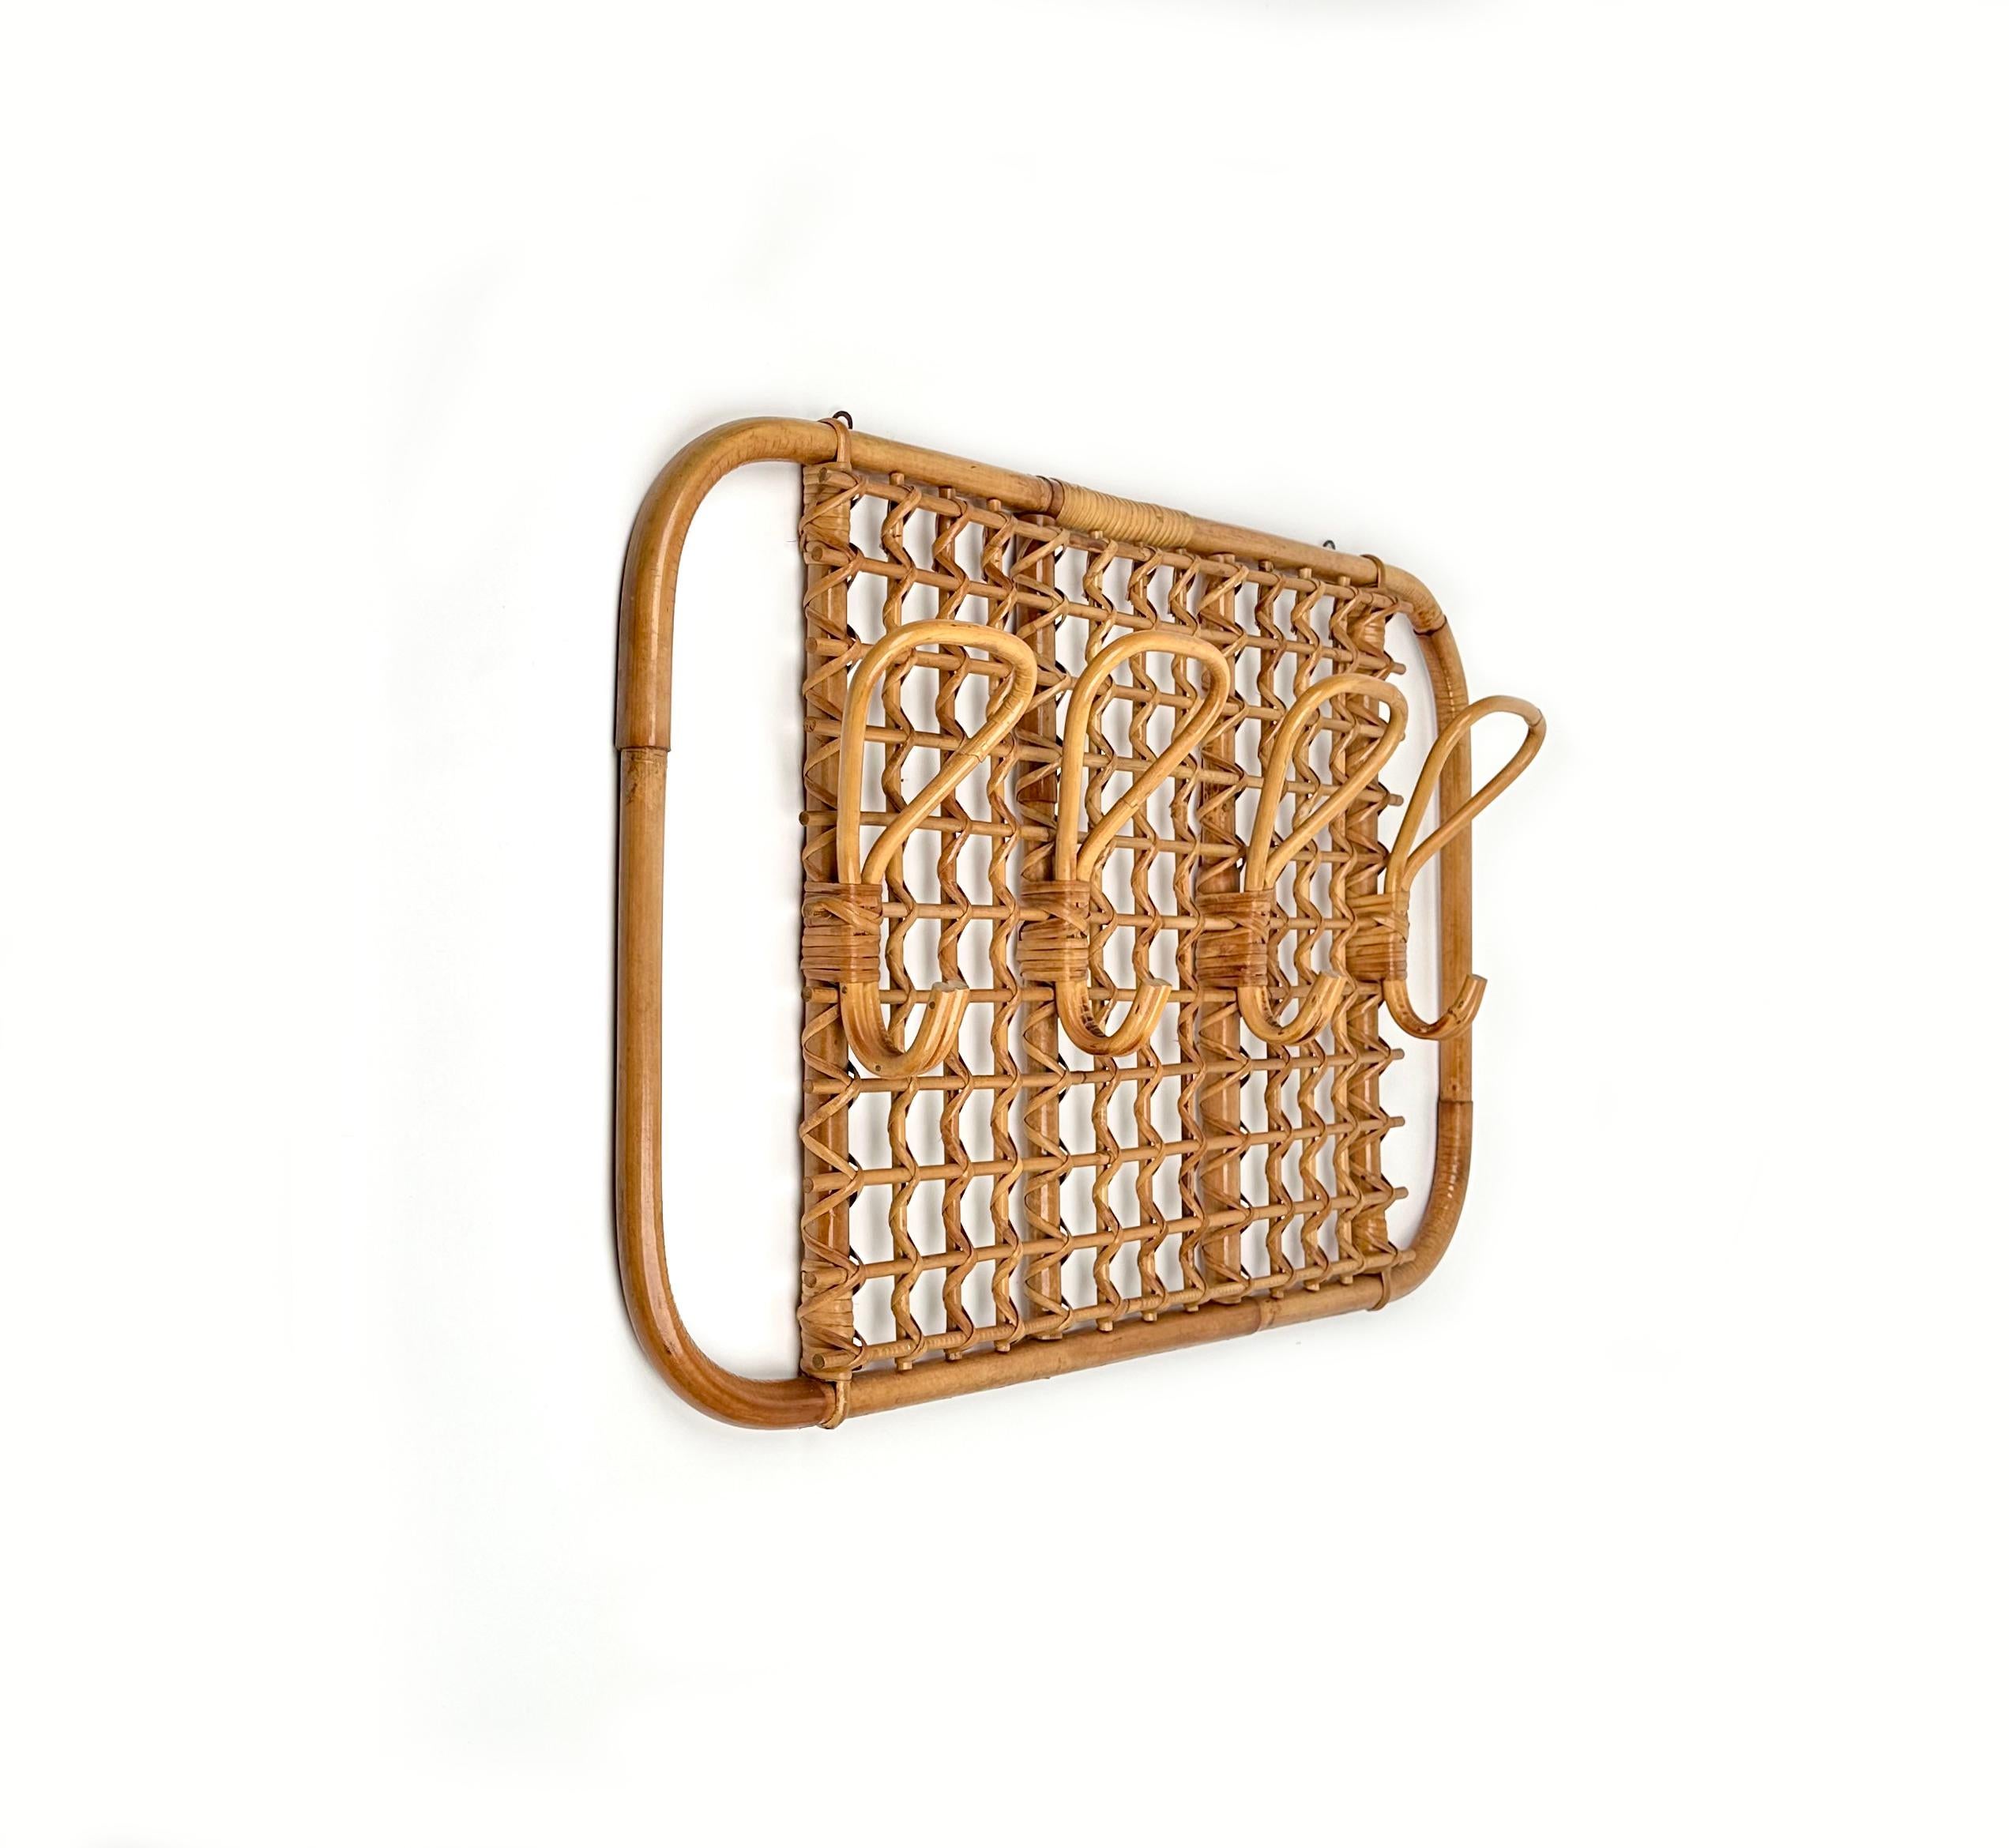 Rectangular coat hanger with rounded corners in bamboo and rattan featuring four hooks. 

Made in Italy in the 1970s.